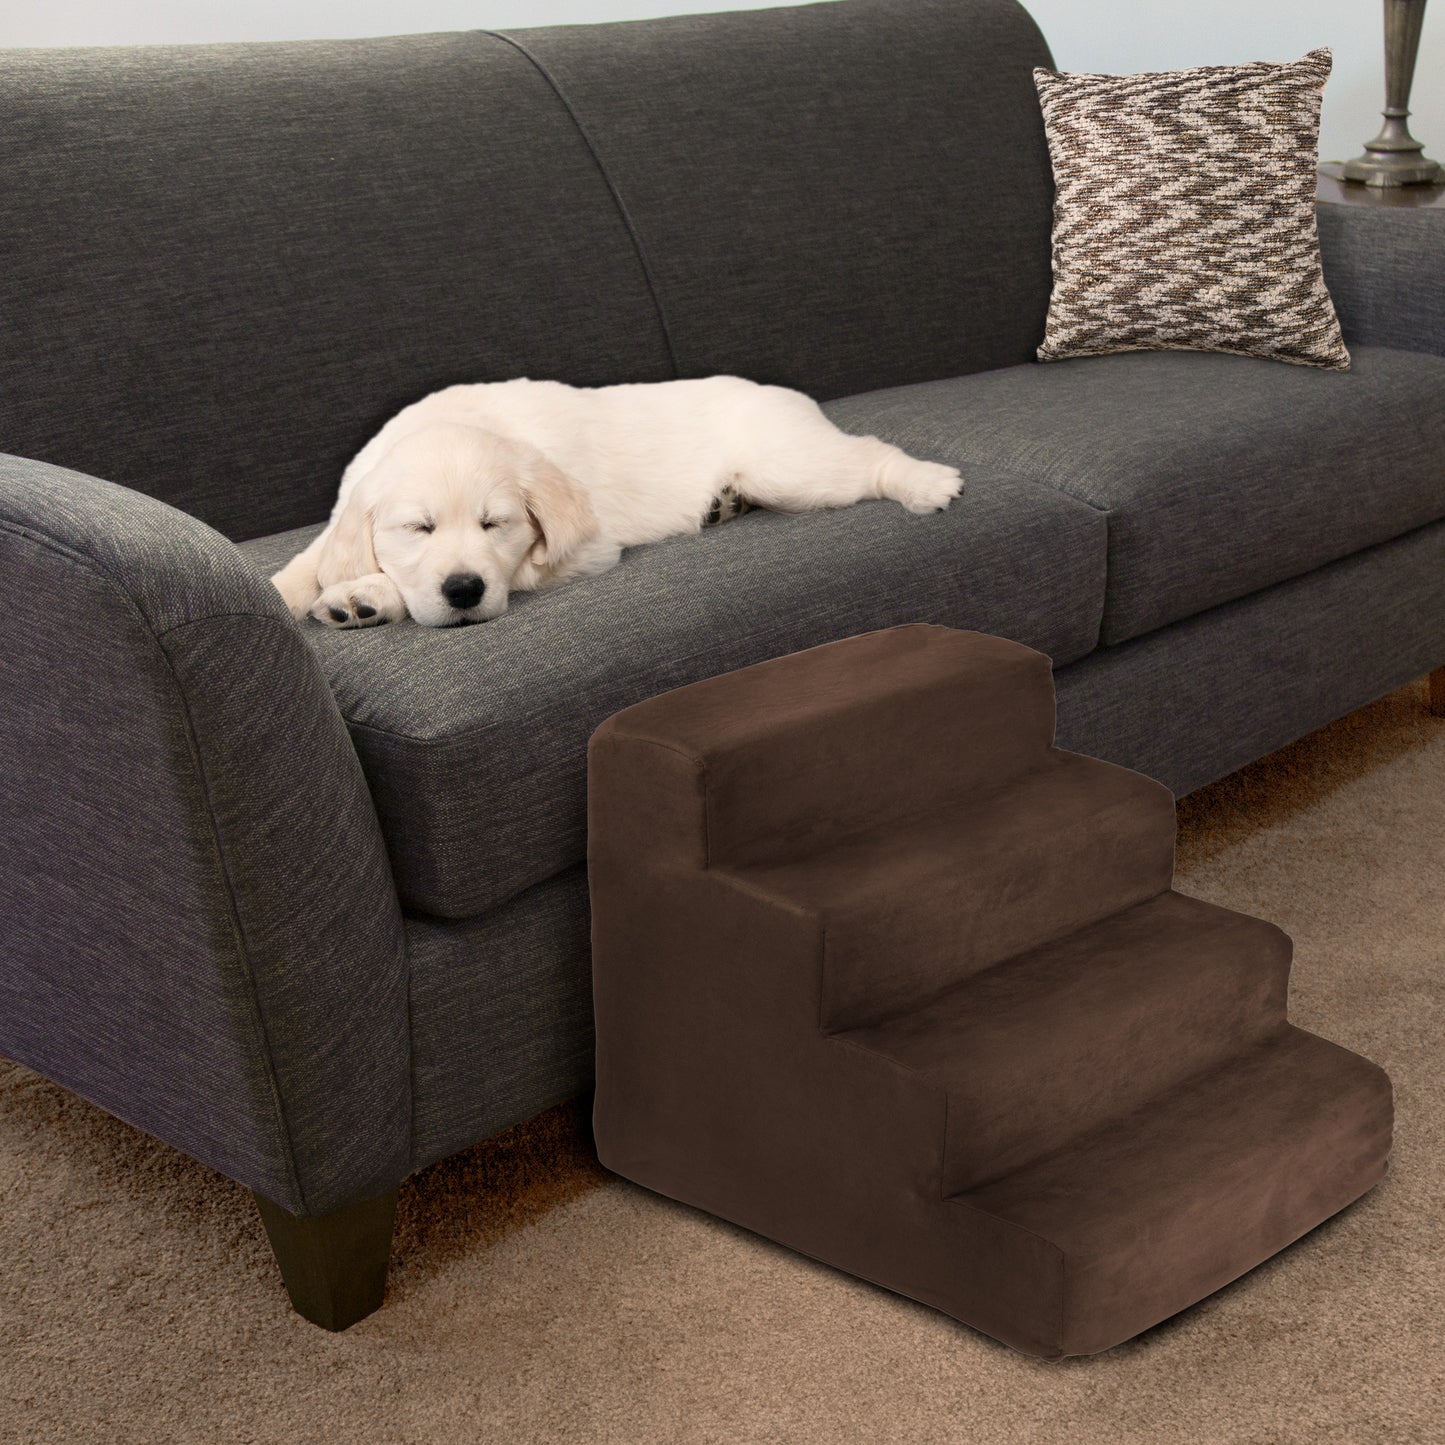 PETMAKER Foam Dog Stairs for Small Pets, Brown